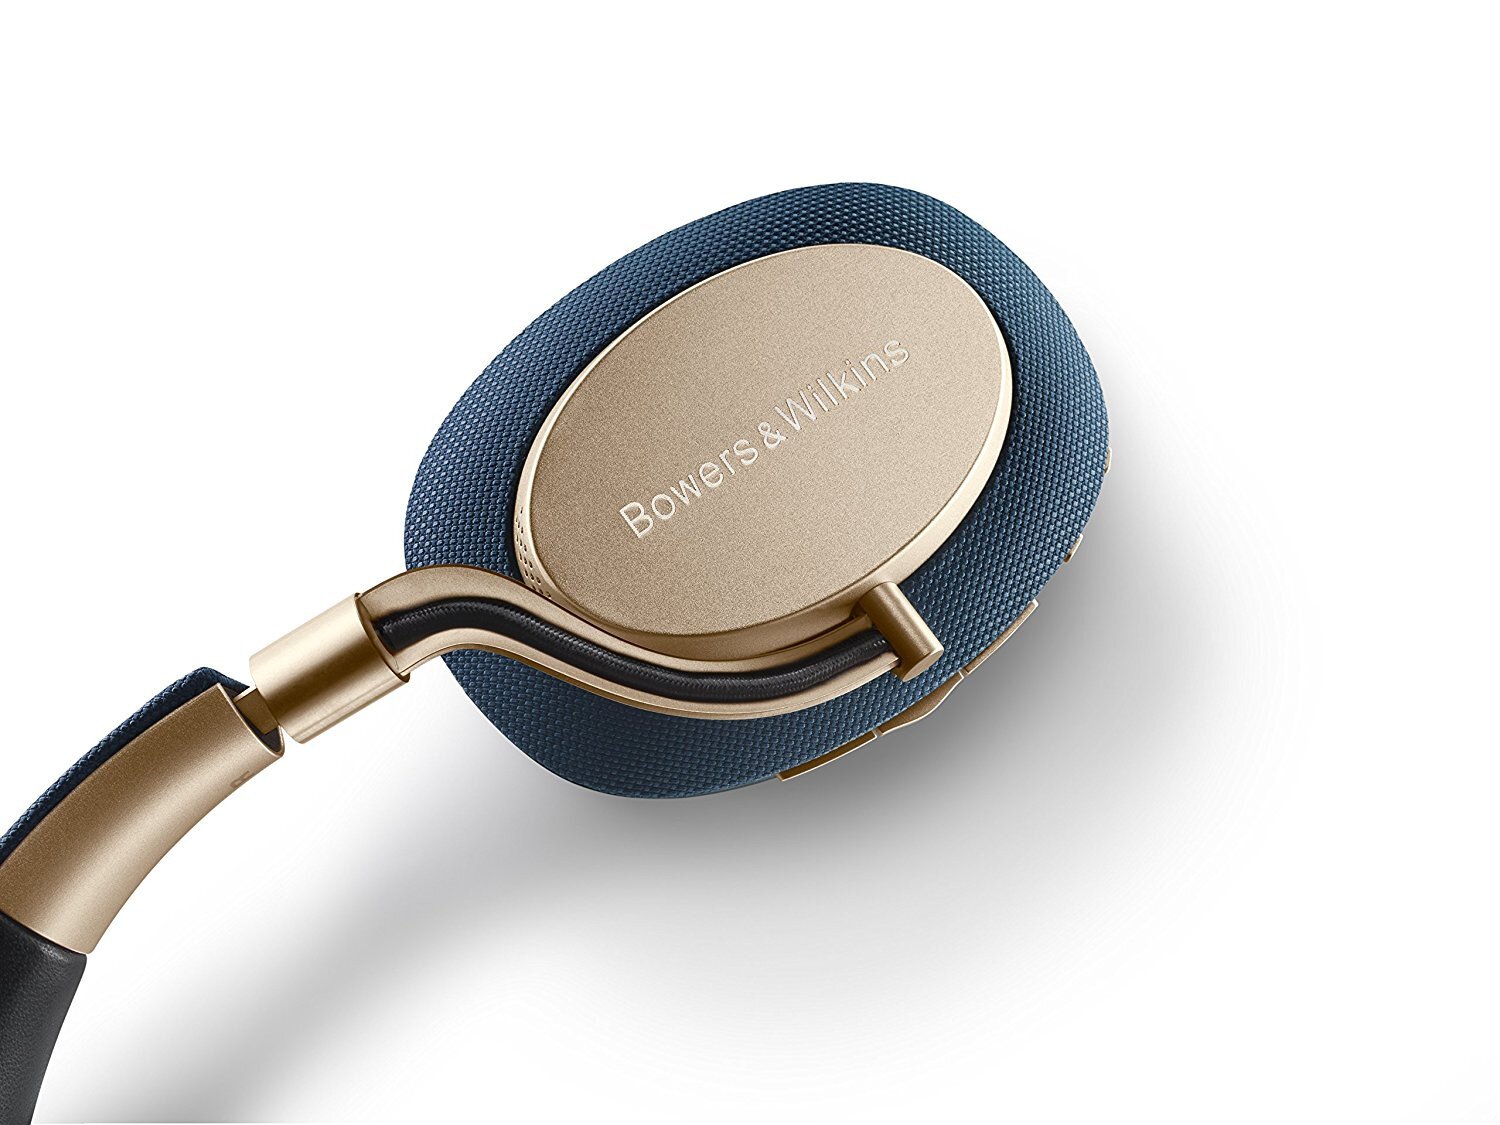 Buy Bowers & Wilkins PX Wireless Noise Cancelling Headphones